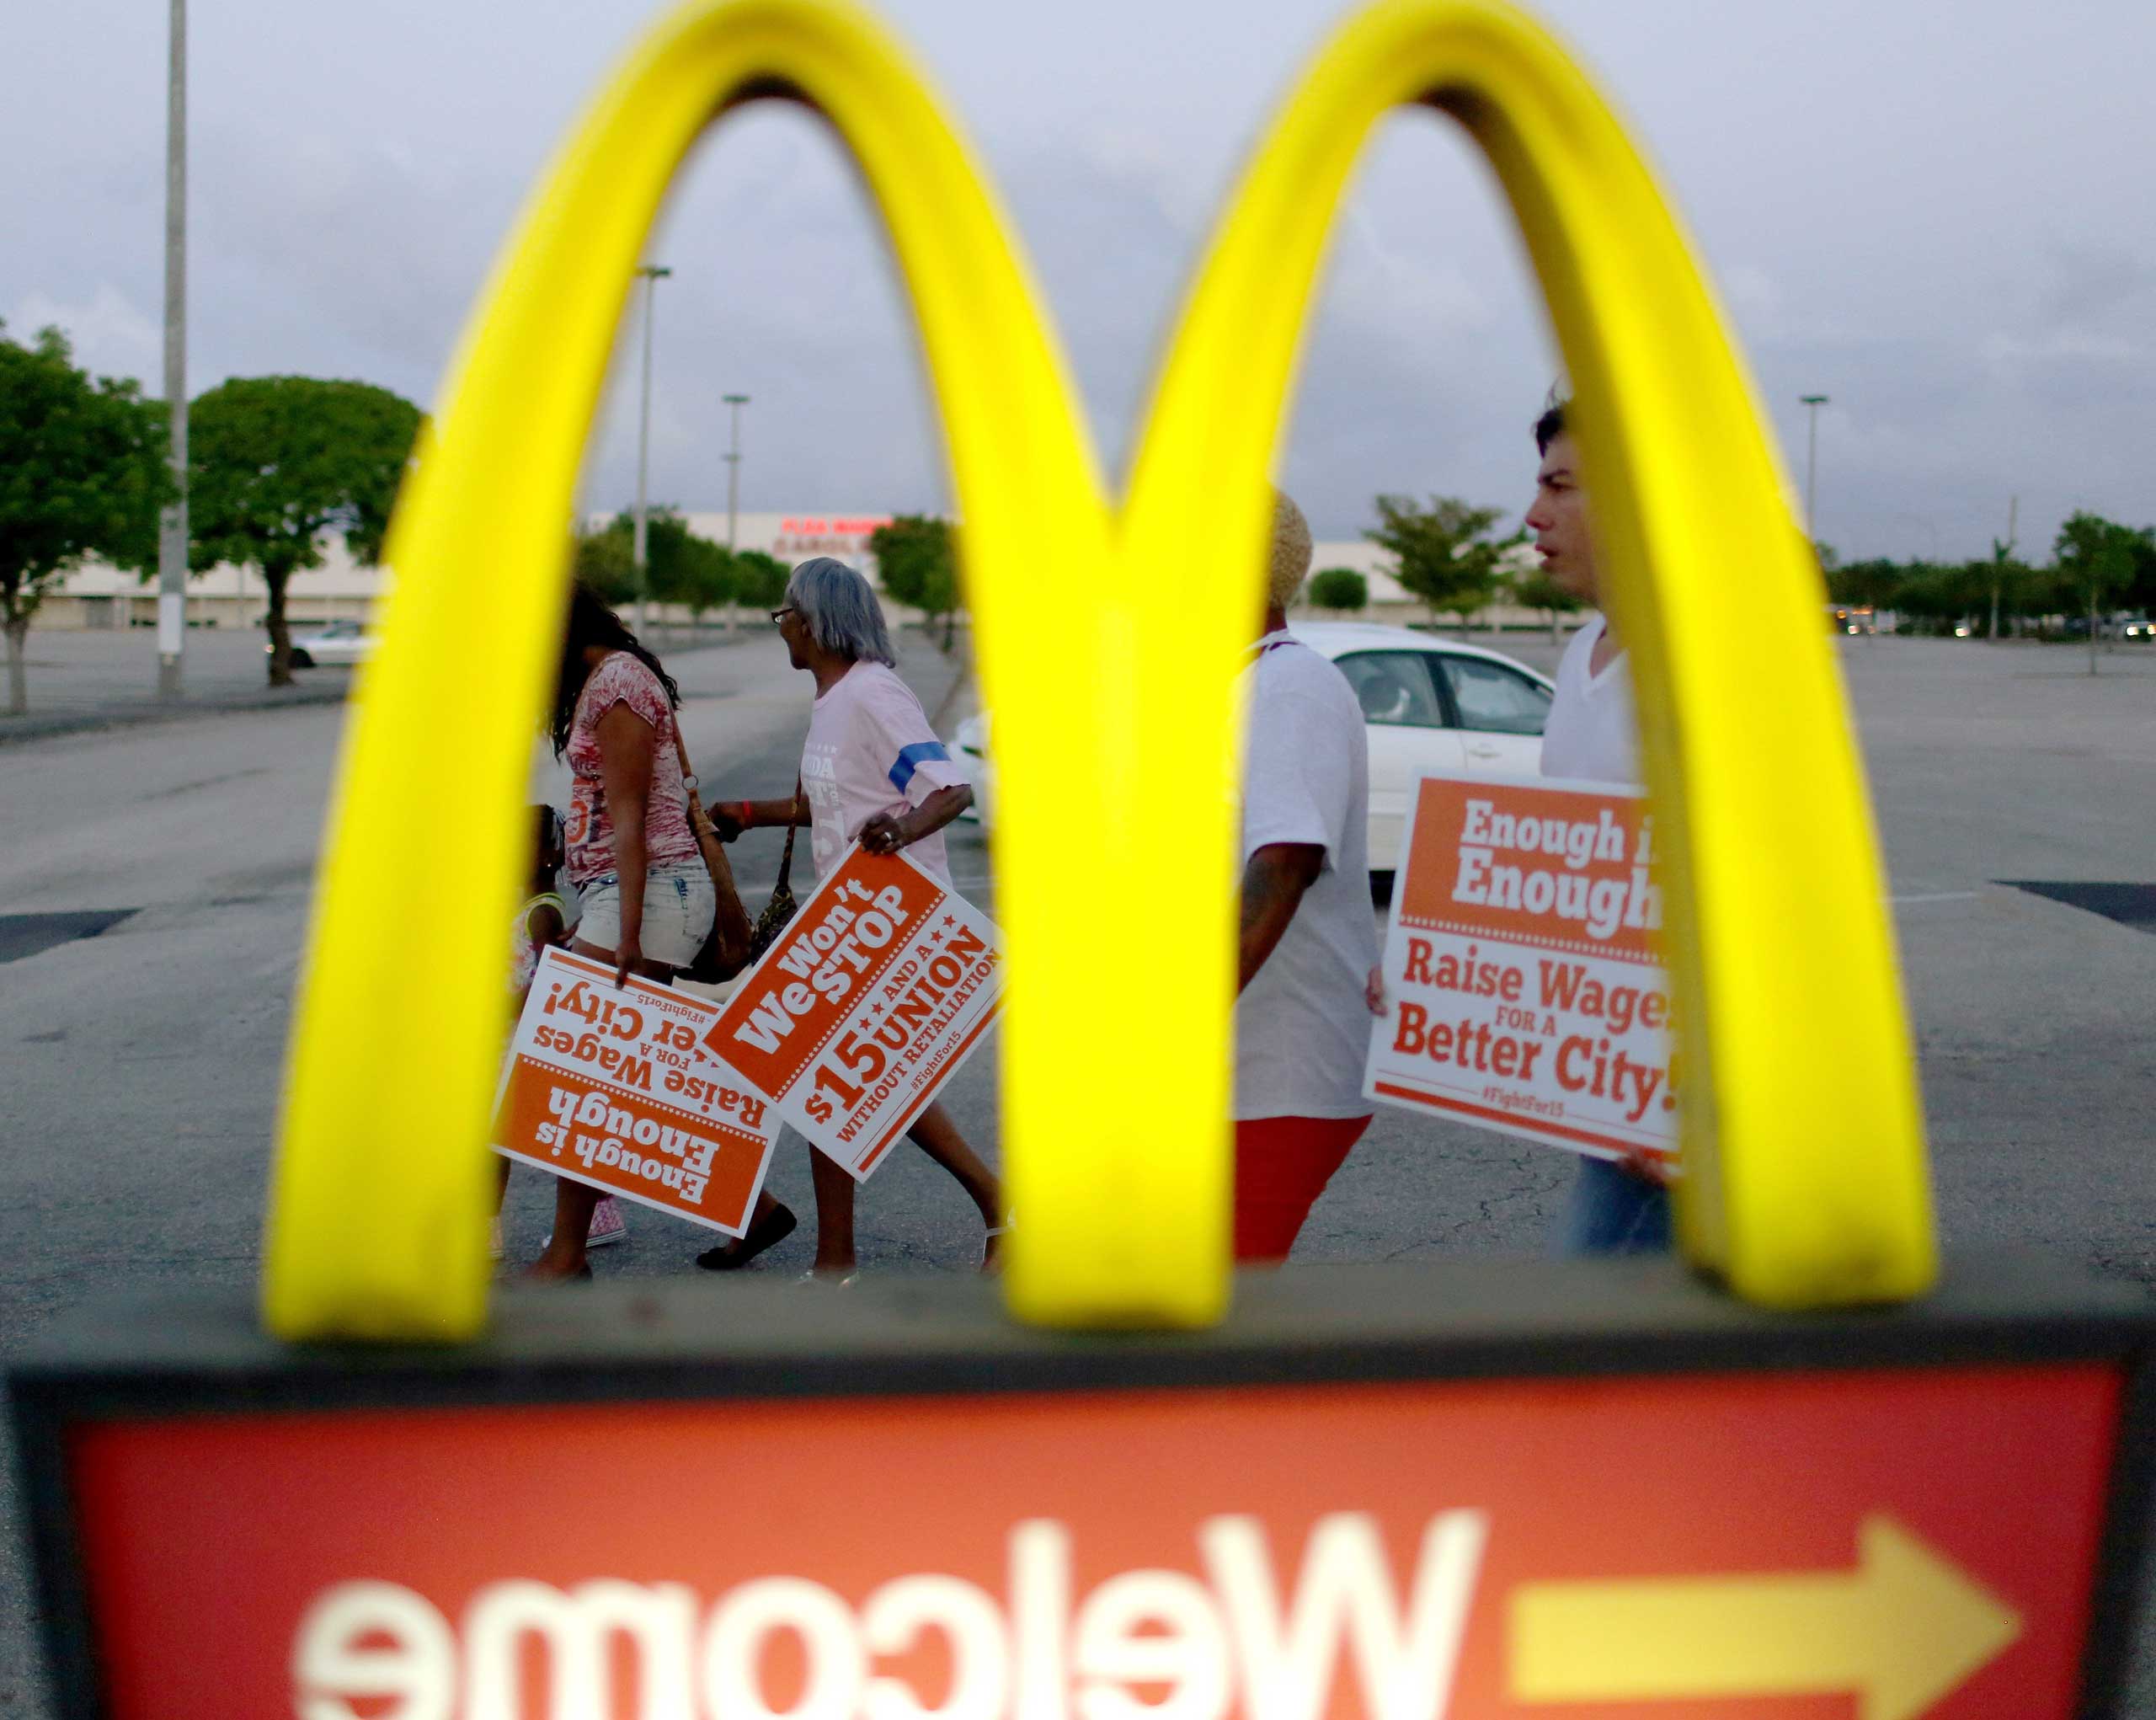 Protesters gather at a McDonald's restaurant on tax day asking for higher wages in Miami Gardens, Fla., on April 15, 2015. (Joe Raedle—Getty Images)